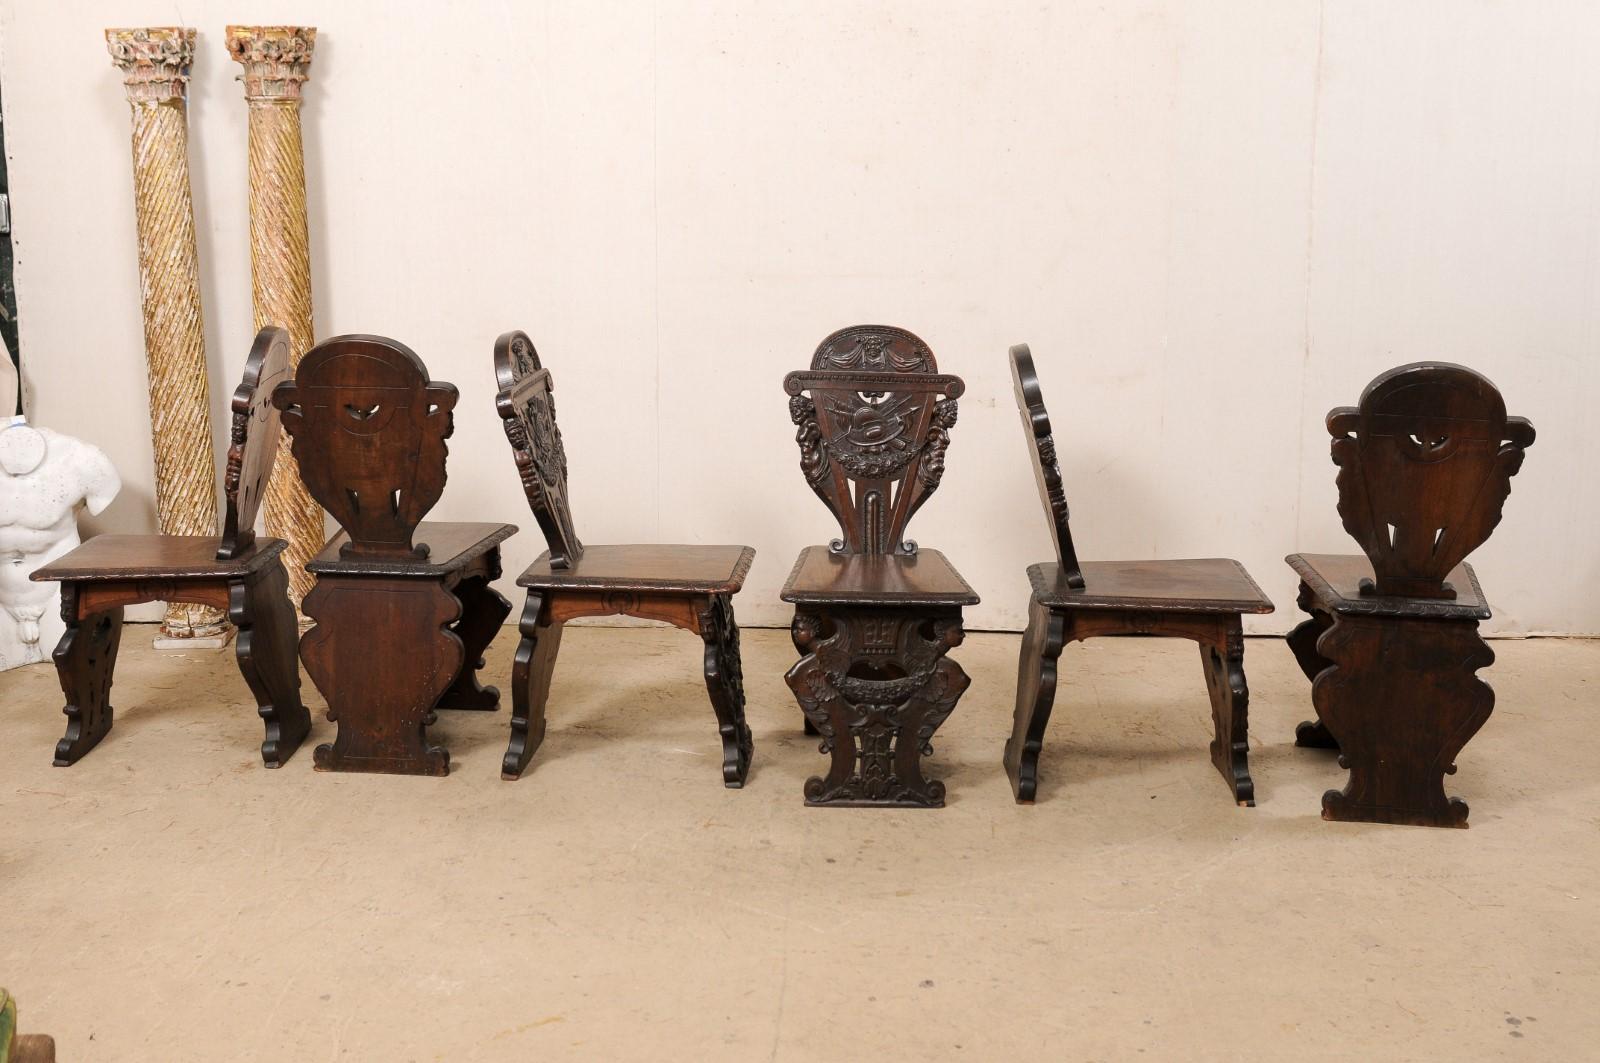 Set of 6 English Renaissance Ornately-Carved Hall Chairs, Turn of 19th & 20th C For Sale 7